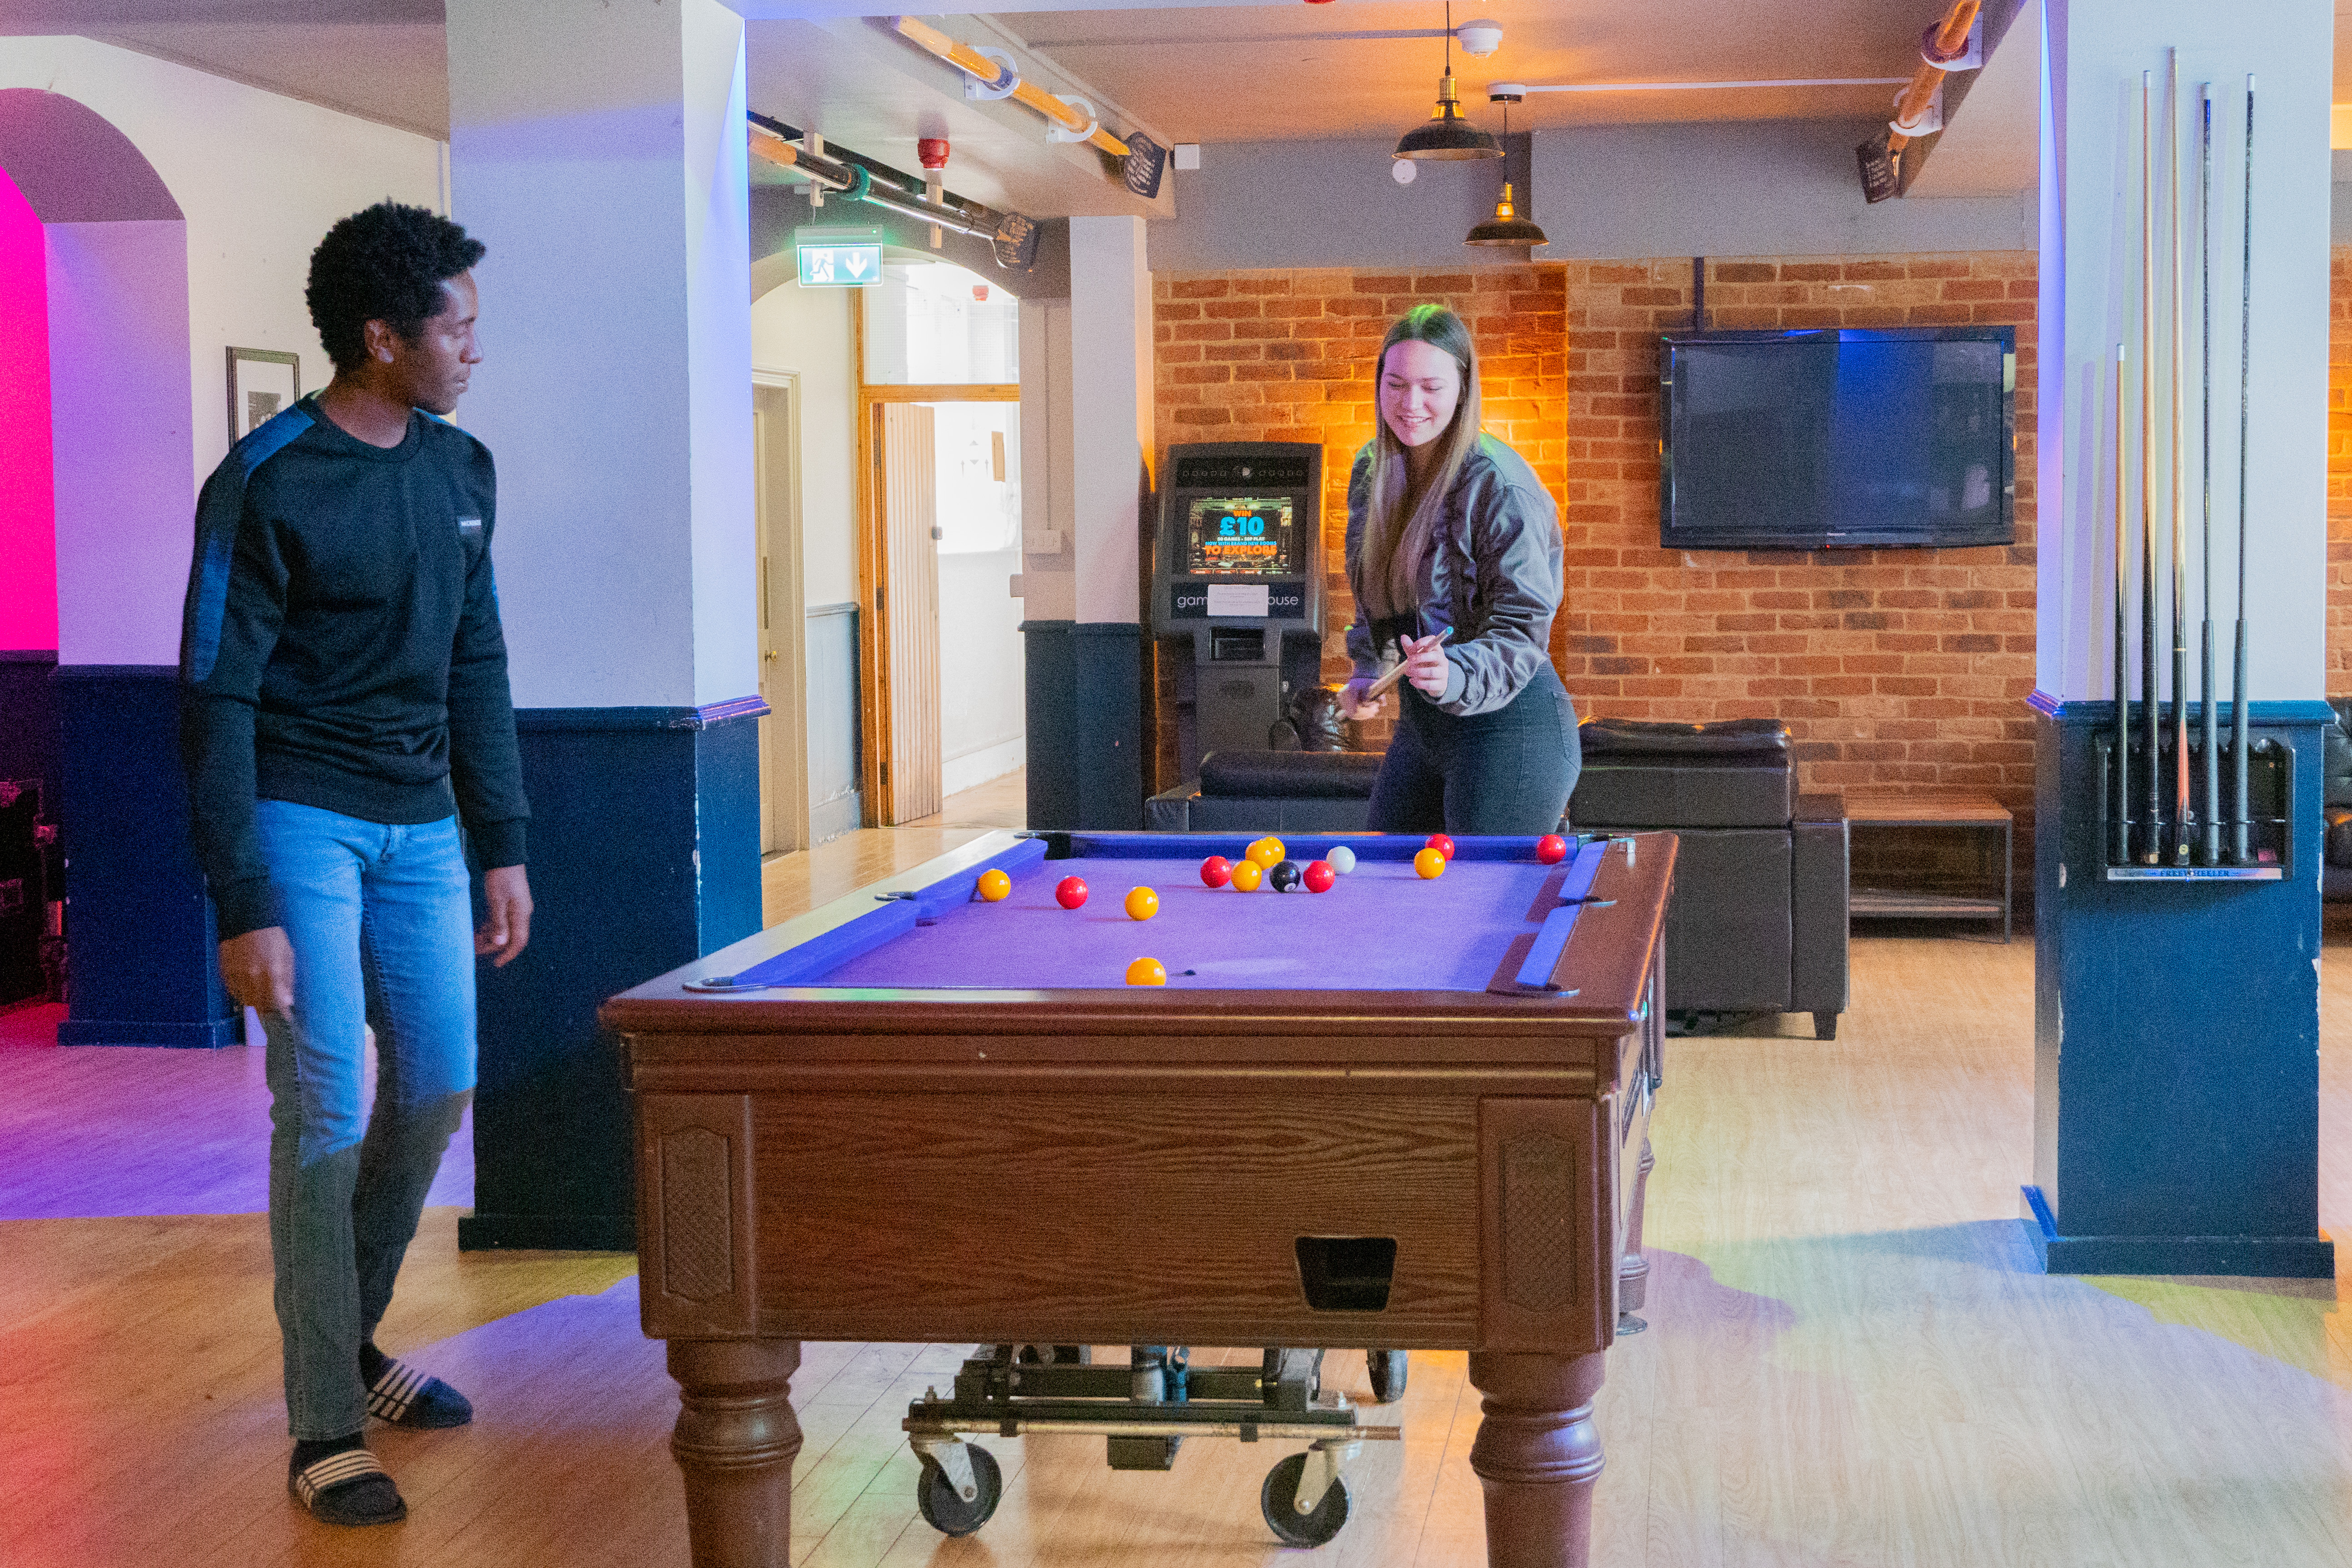 Students playing pool in the LMH Bar